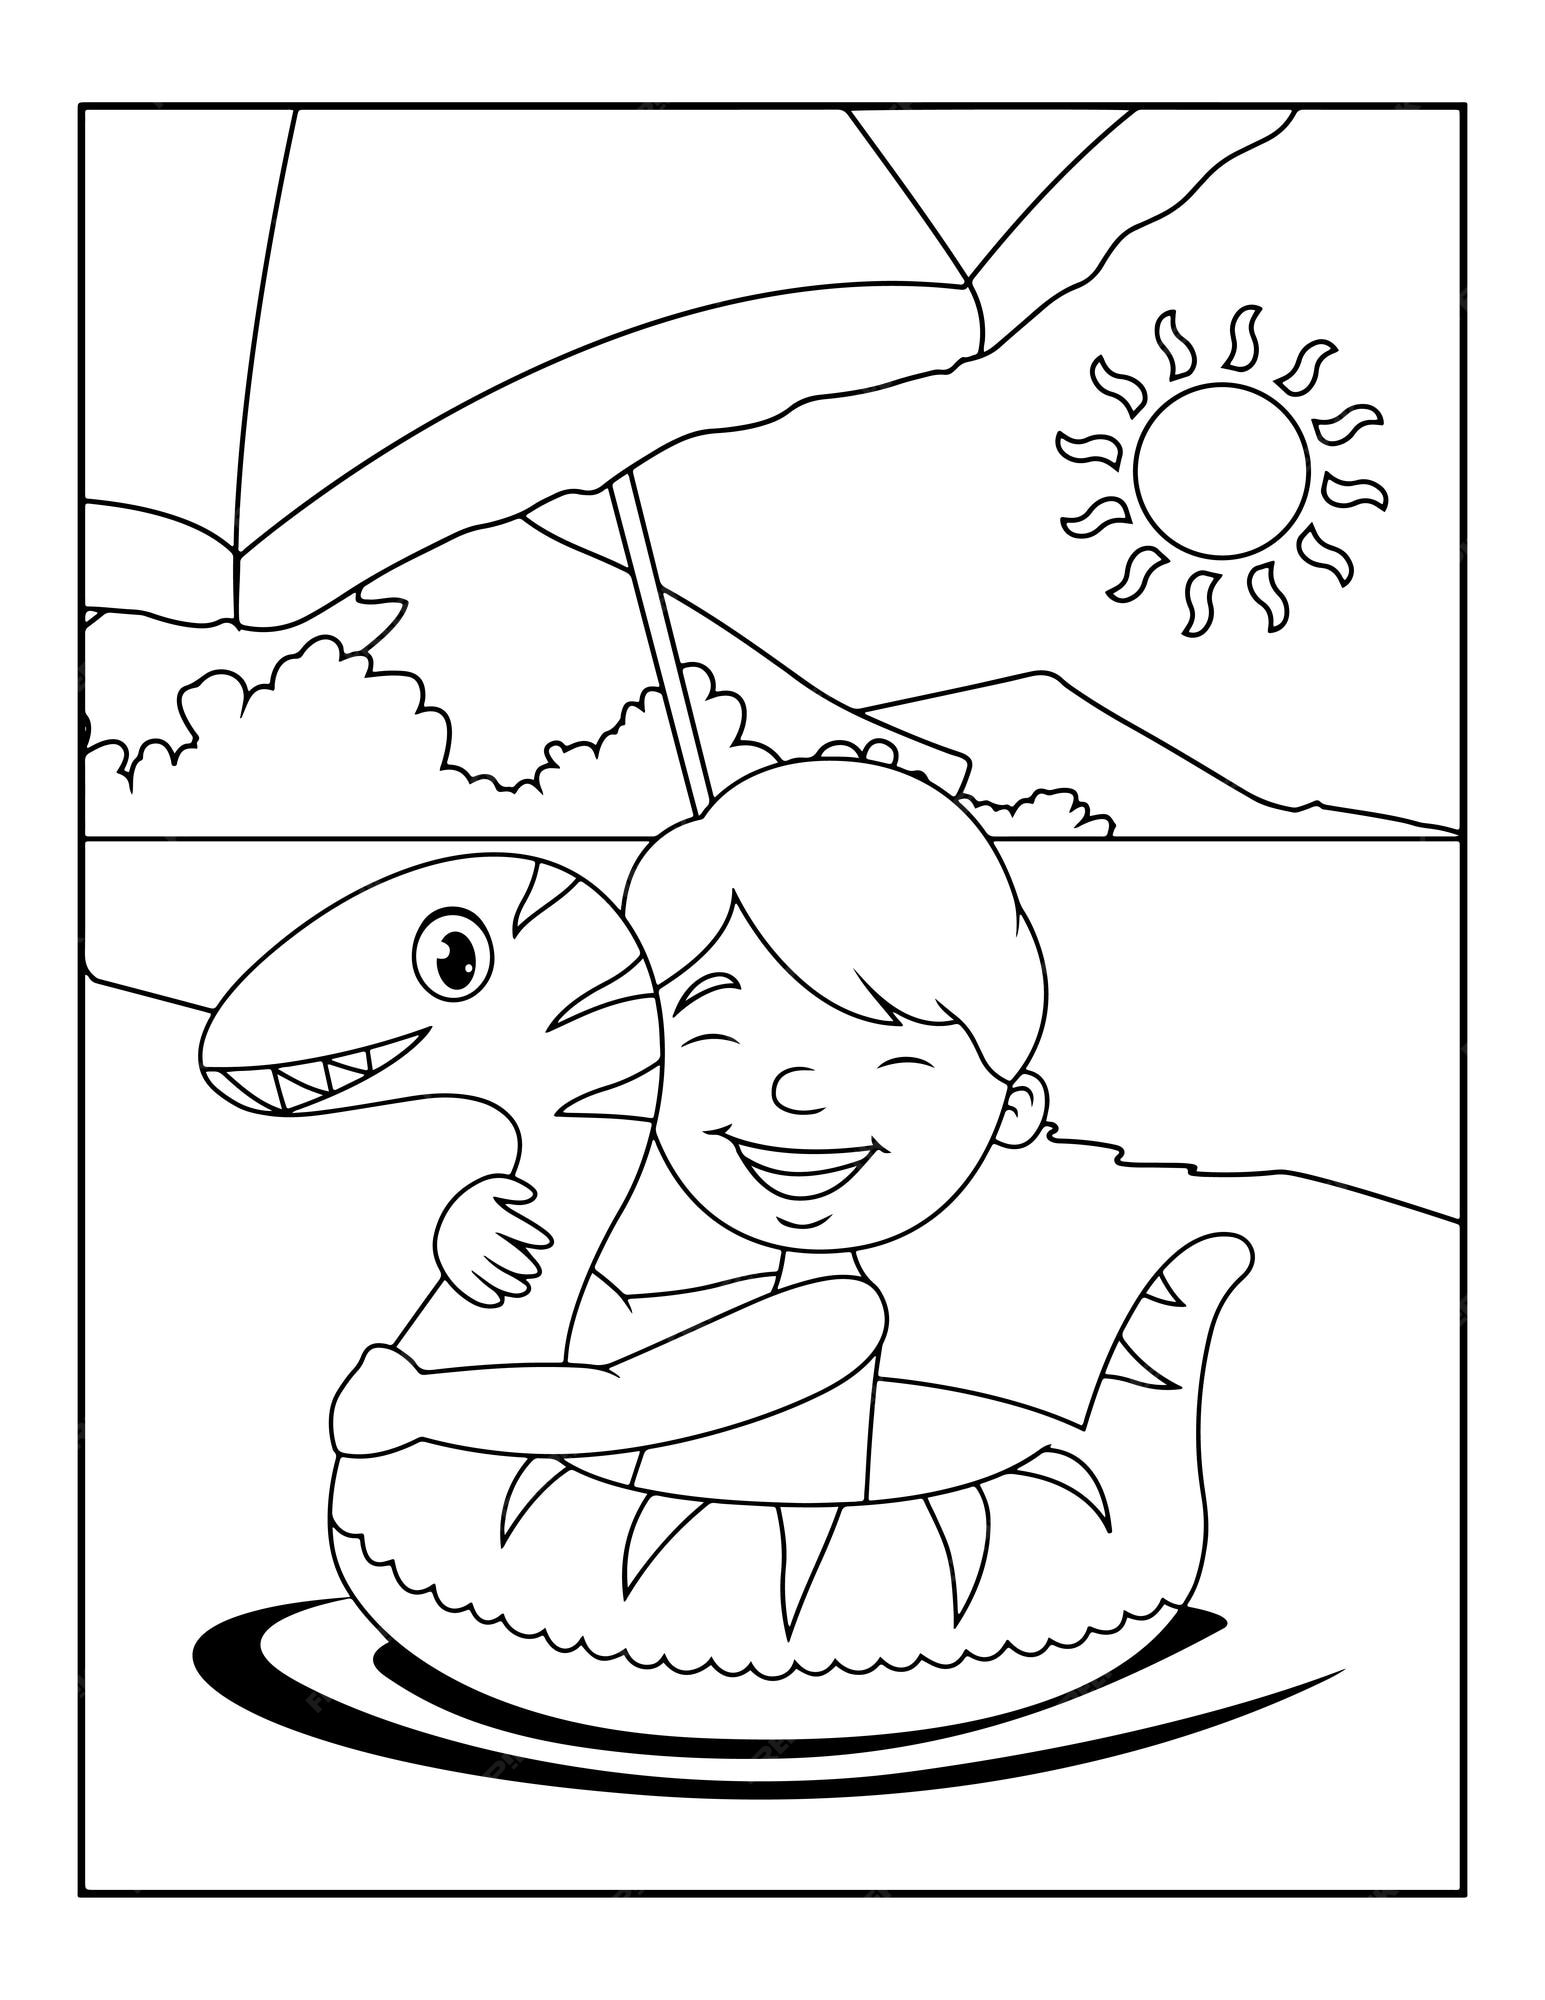 Premium vector summer activity coloring pages for kids hello summer coloring book for children